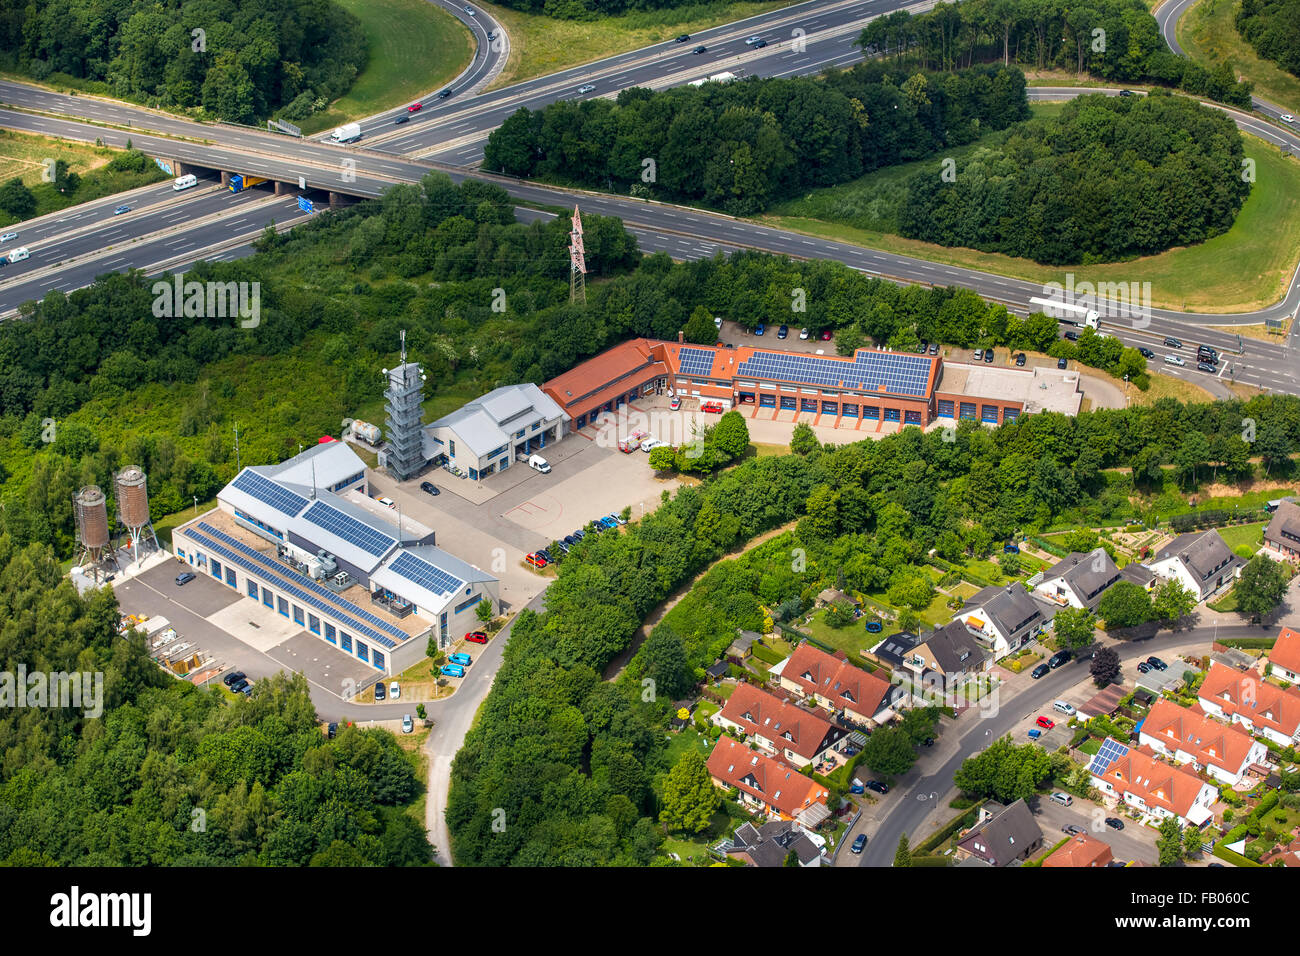 Firemen Service Center Unna at the Florian street, Unna, Ruhr area, North Rhine-Westphalia, Germany, Europe, Aerial view, Stock Photo